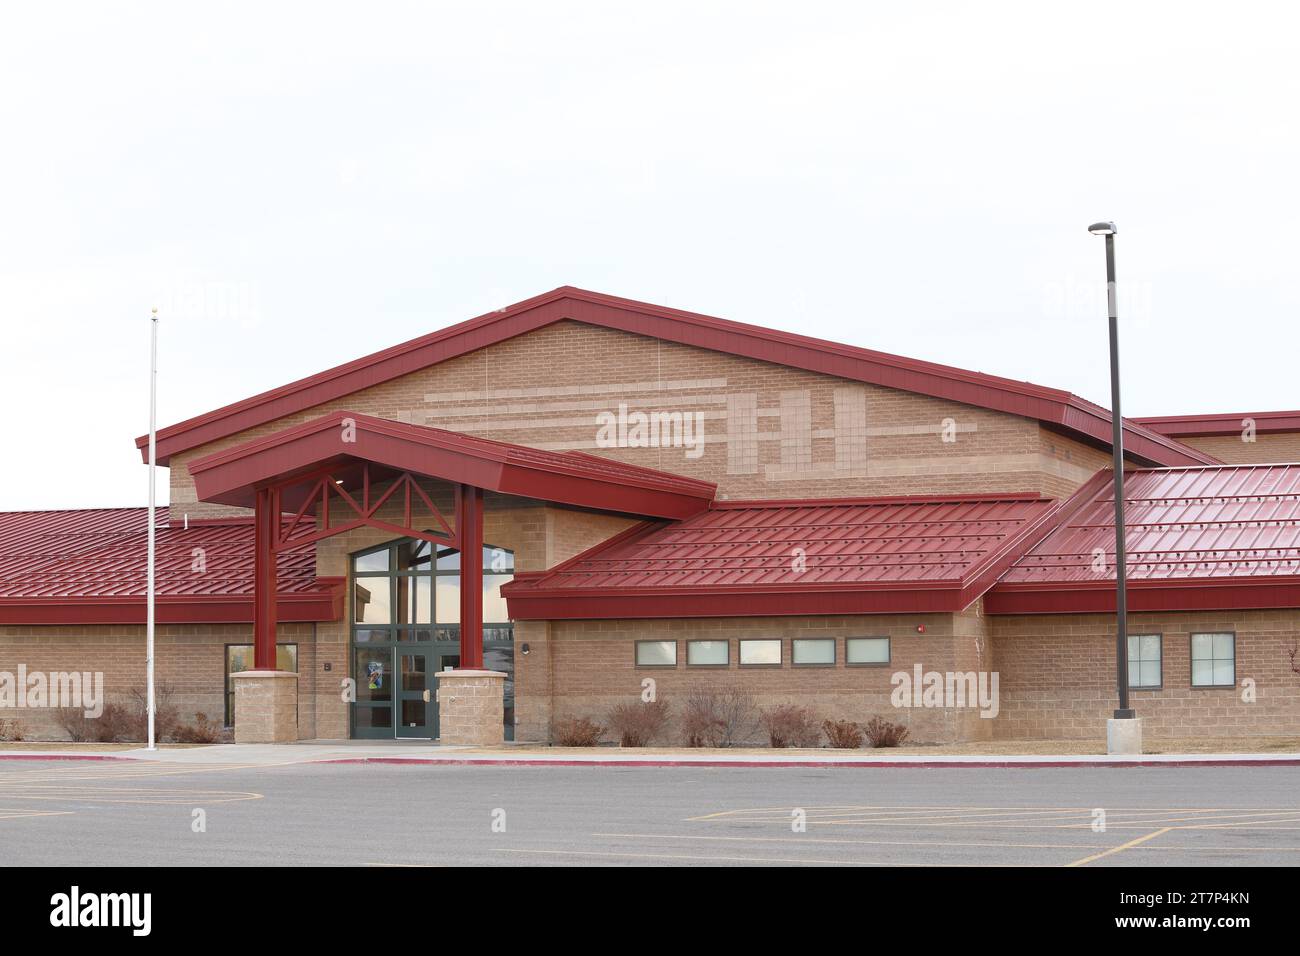 The exterior of the new Snake river elementary school in Rigby, Idaho showing the entry/exit doors, and modern facade. Stock Photo